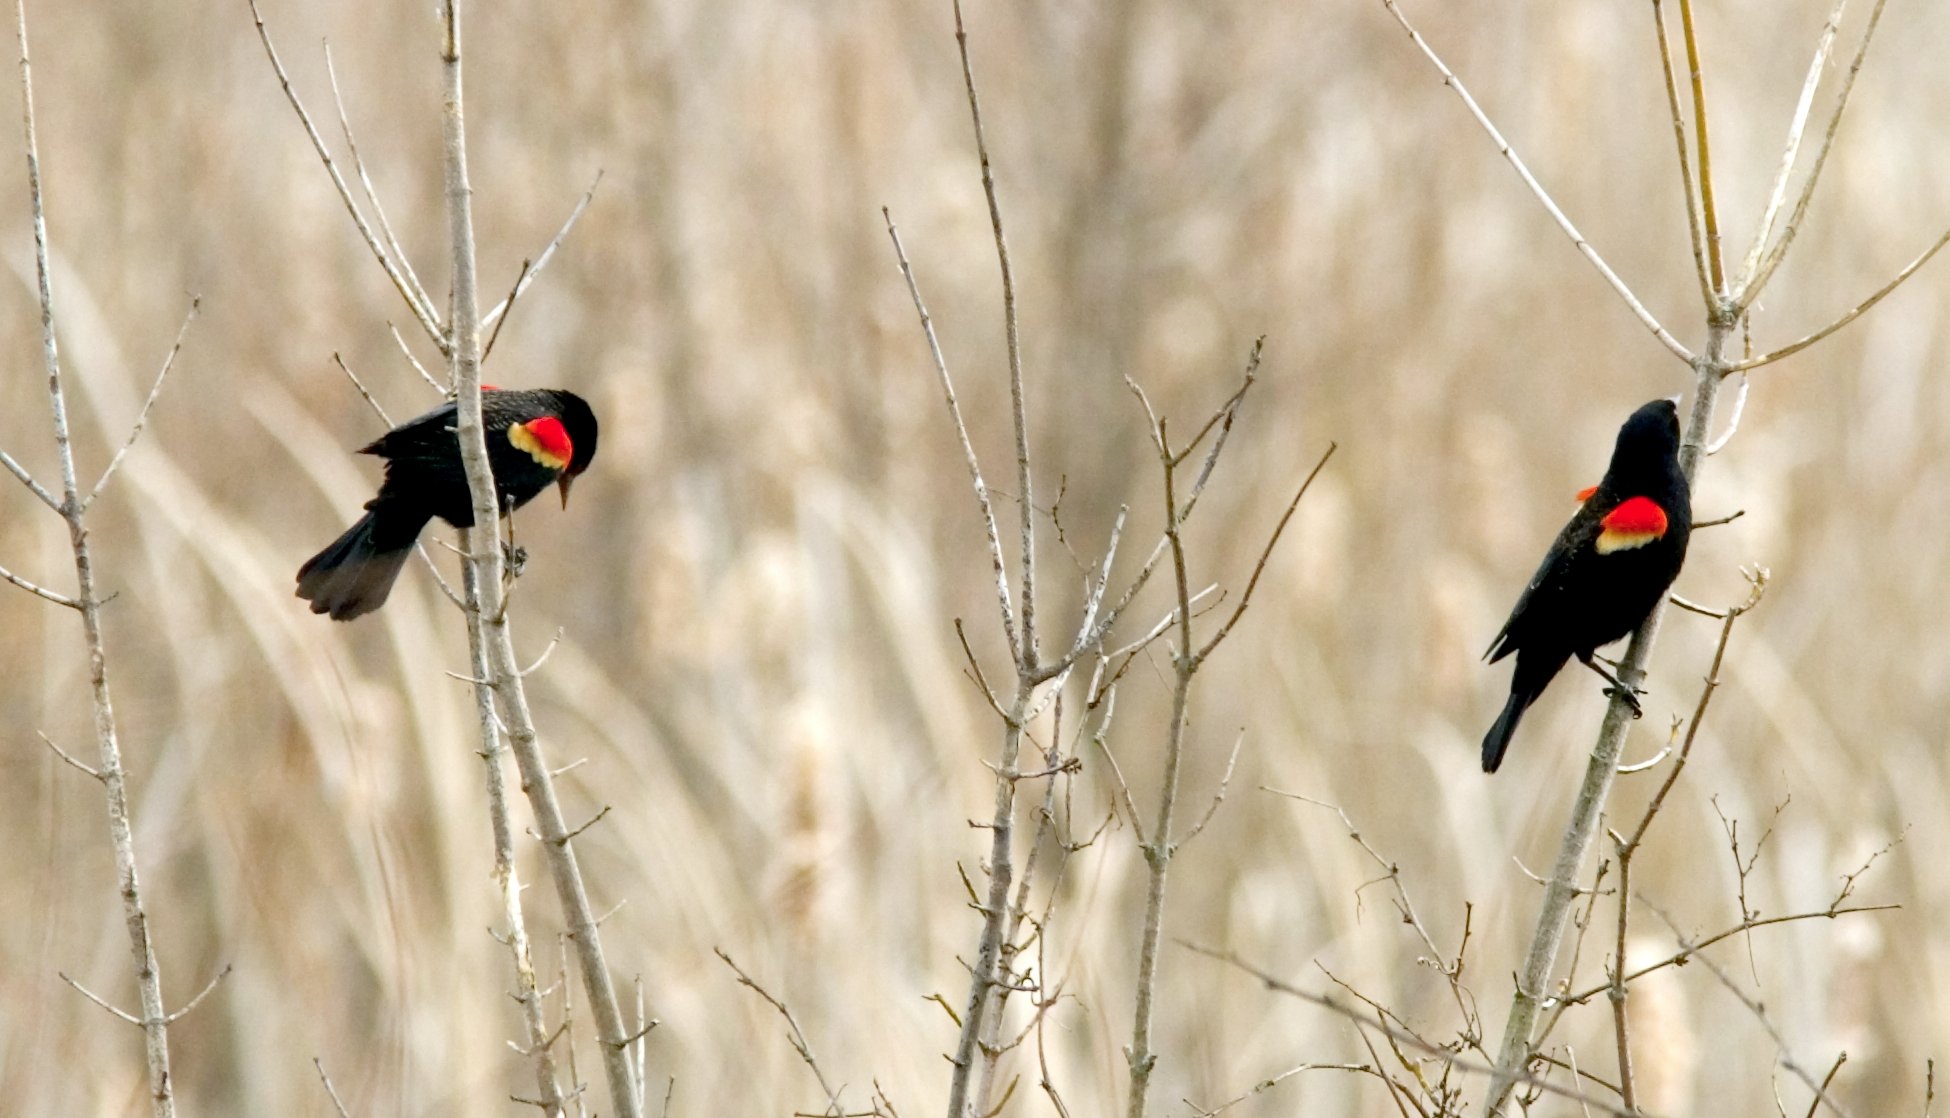 Ohio Bird Photo Collection: Red Winged Male Blackbirds